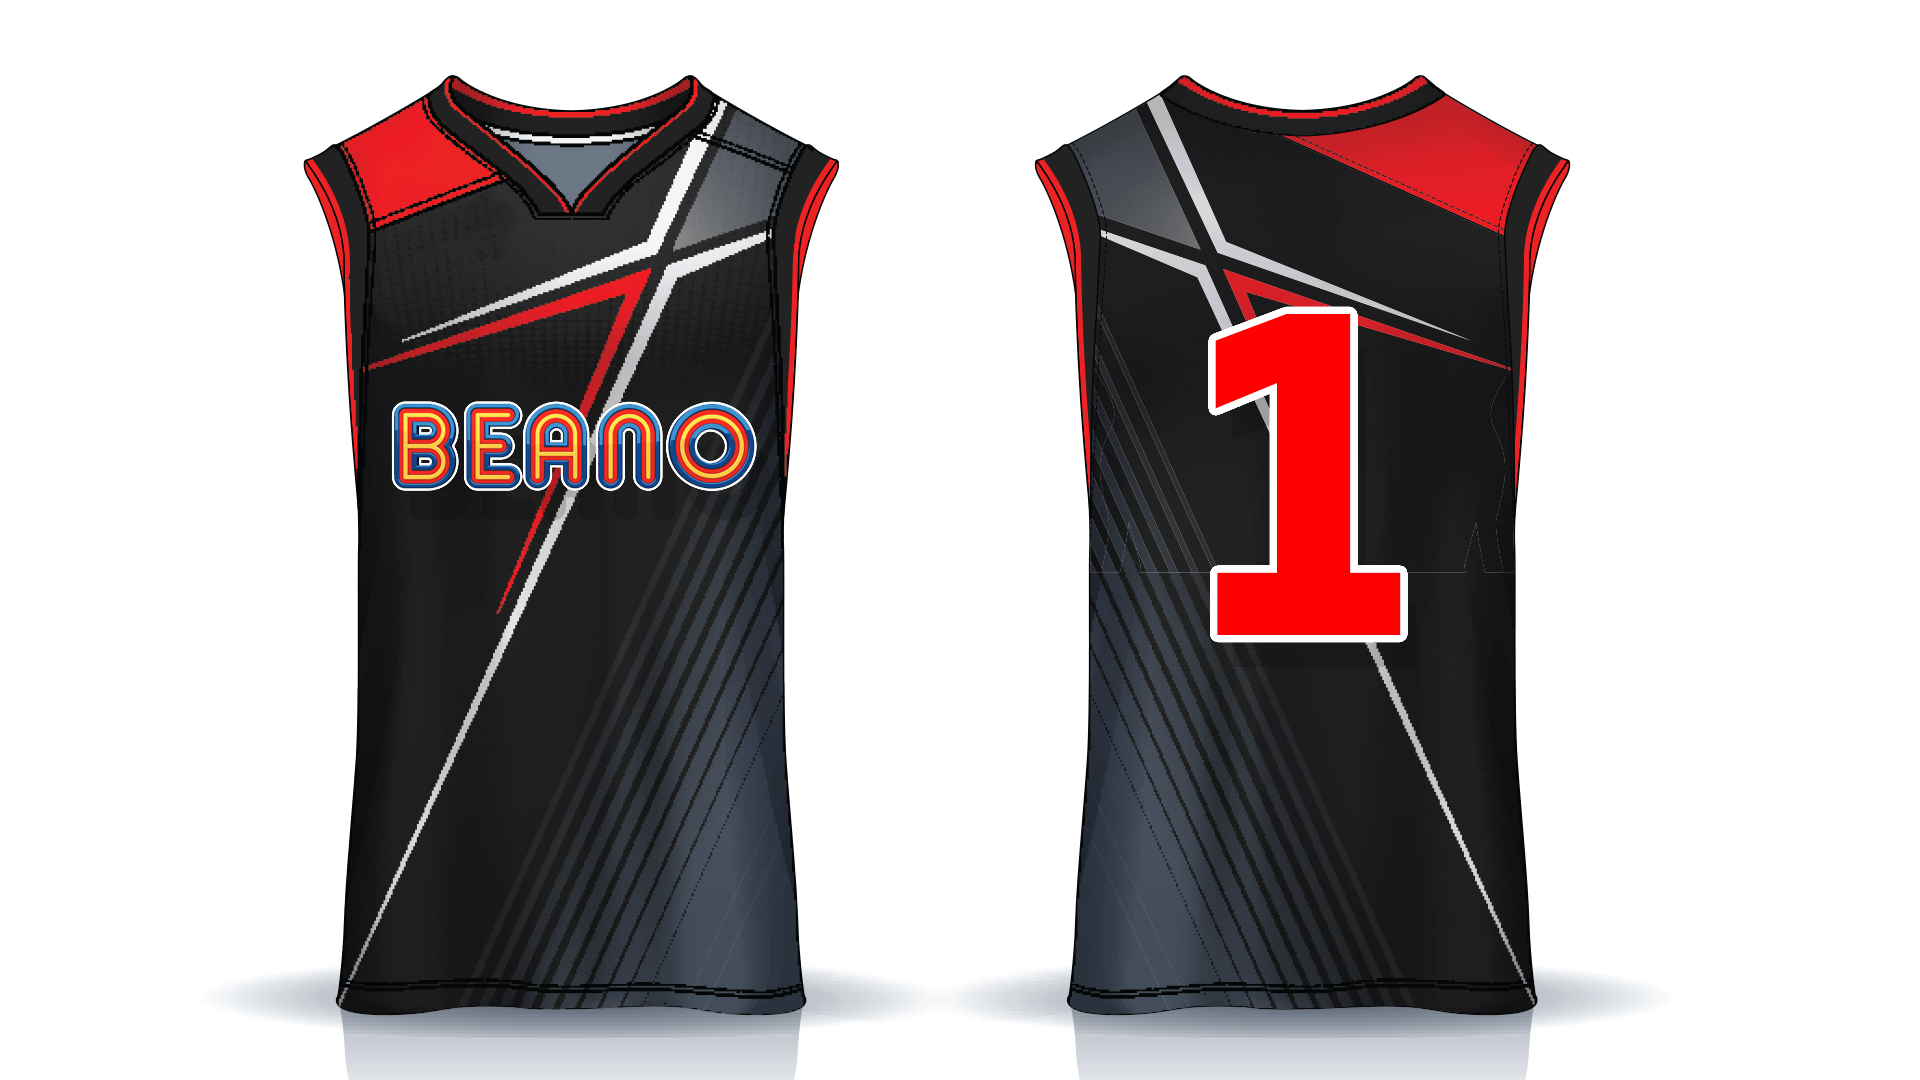 A very cool Beano basketball vest